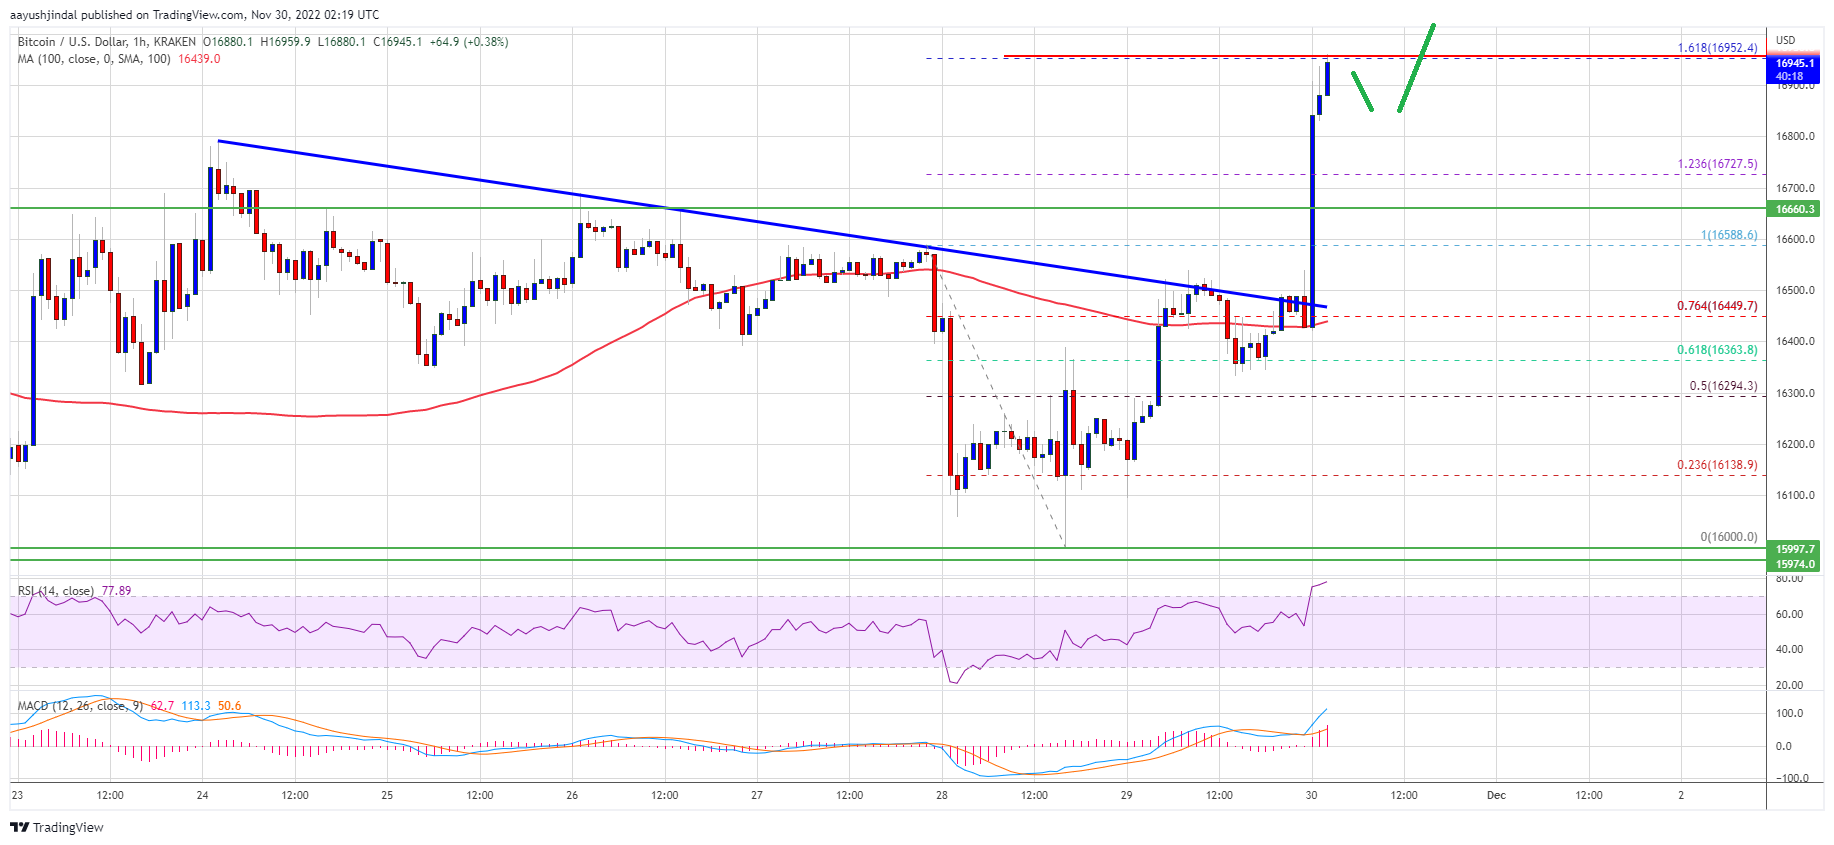 Bitcoin Price Regains Traction, BTC Seems Primed for More Upsides